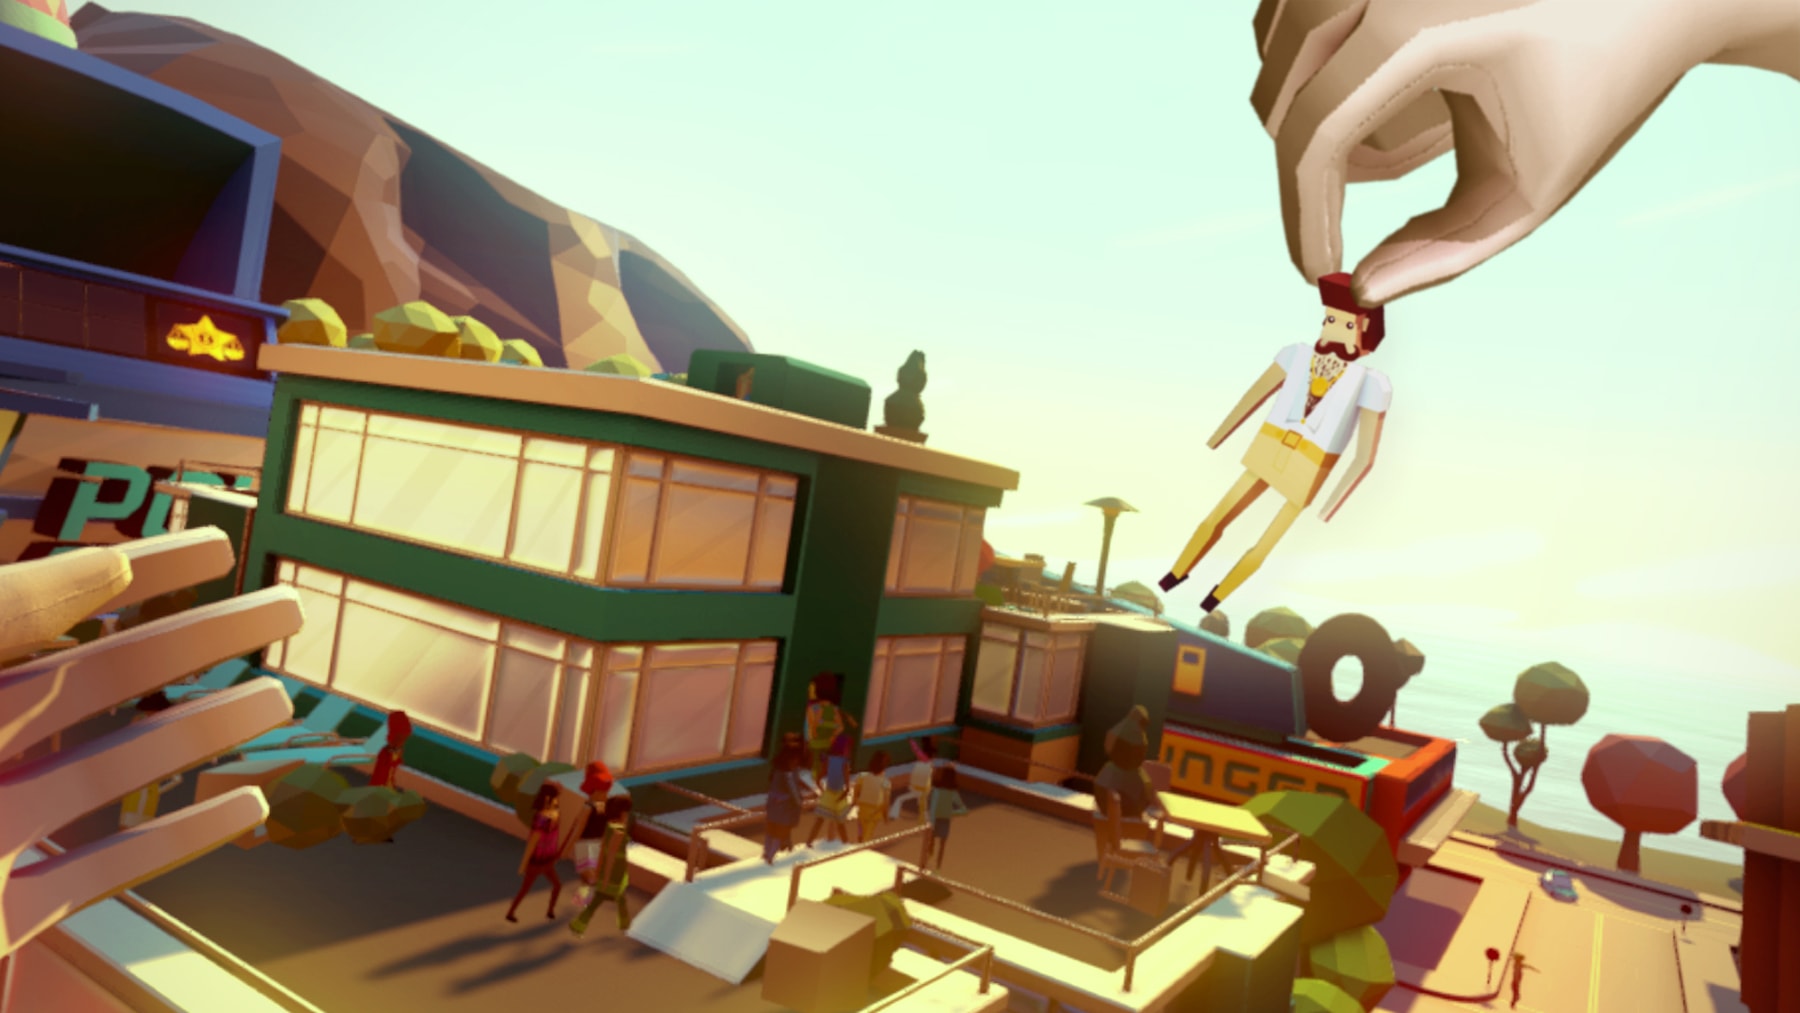 Screenshot from Giant Cop of a huge hand picking up and moving a game character